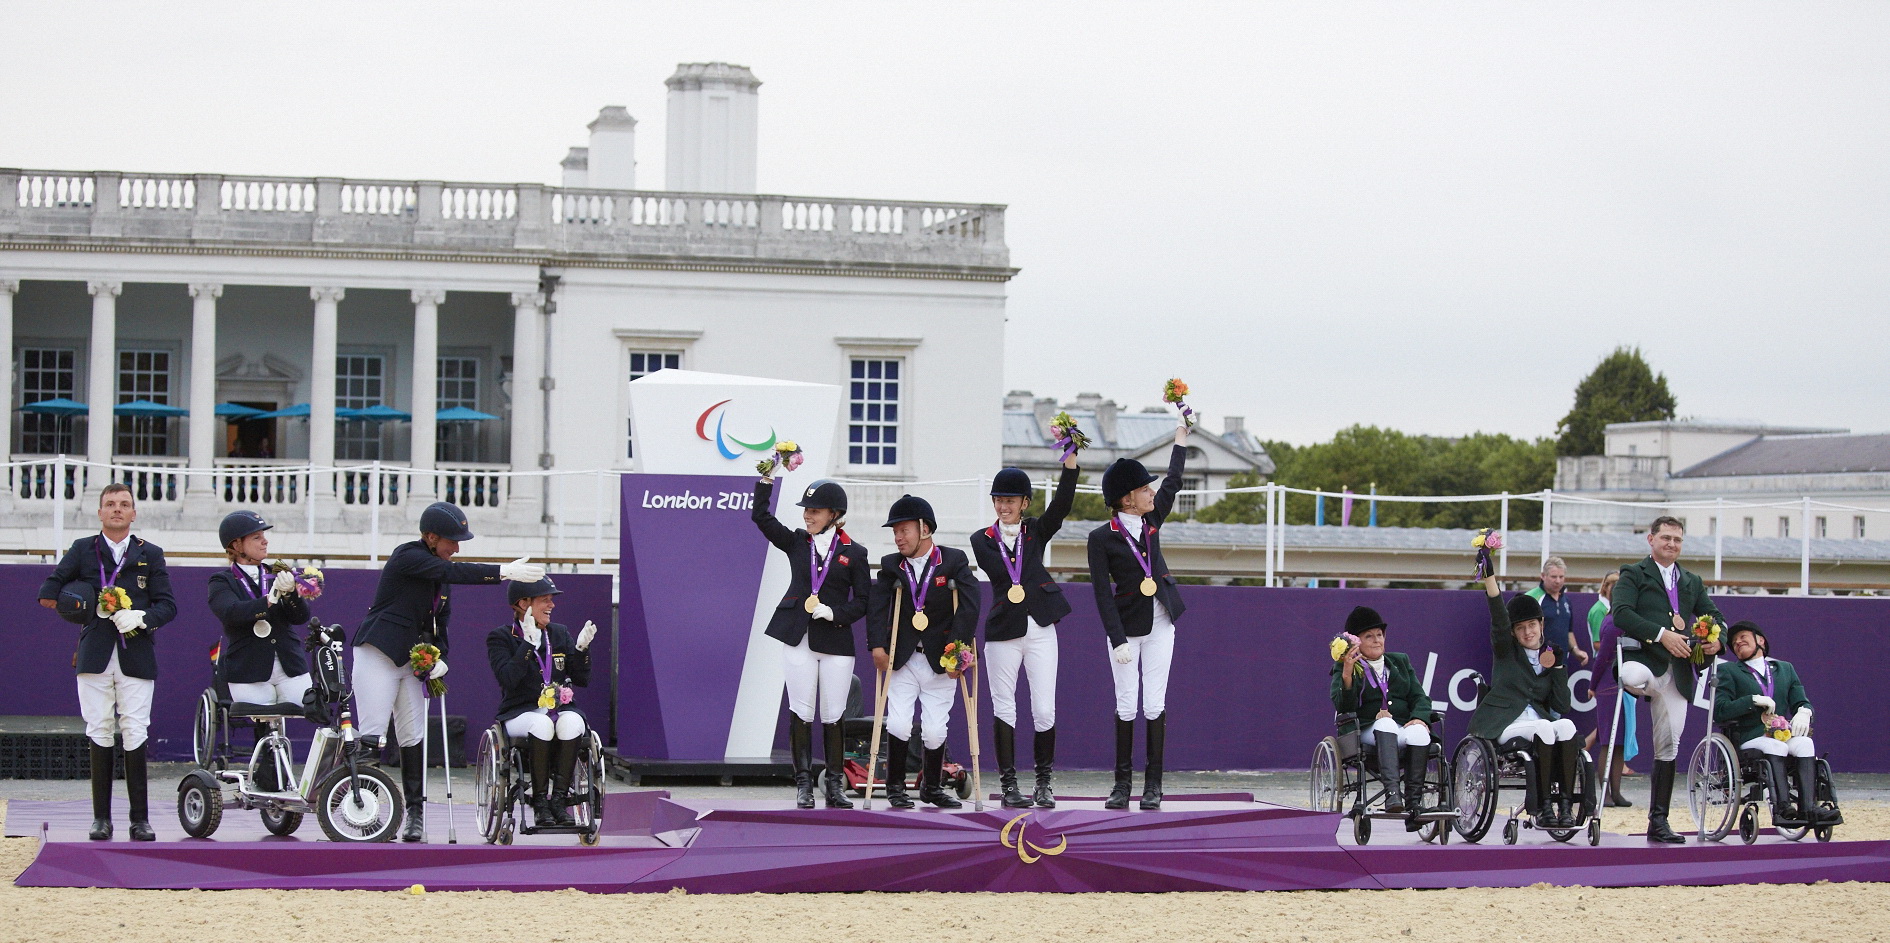 London 2012 Team podium, Great Britain in gold, Germany in silver and Ireland in bronze (FEI/Liz Gregg)